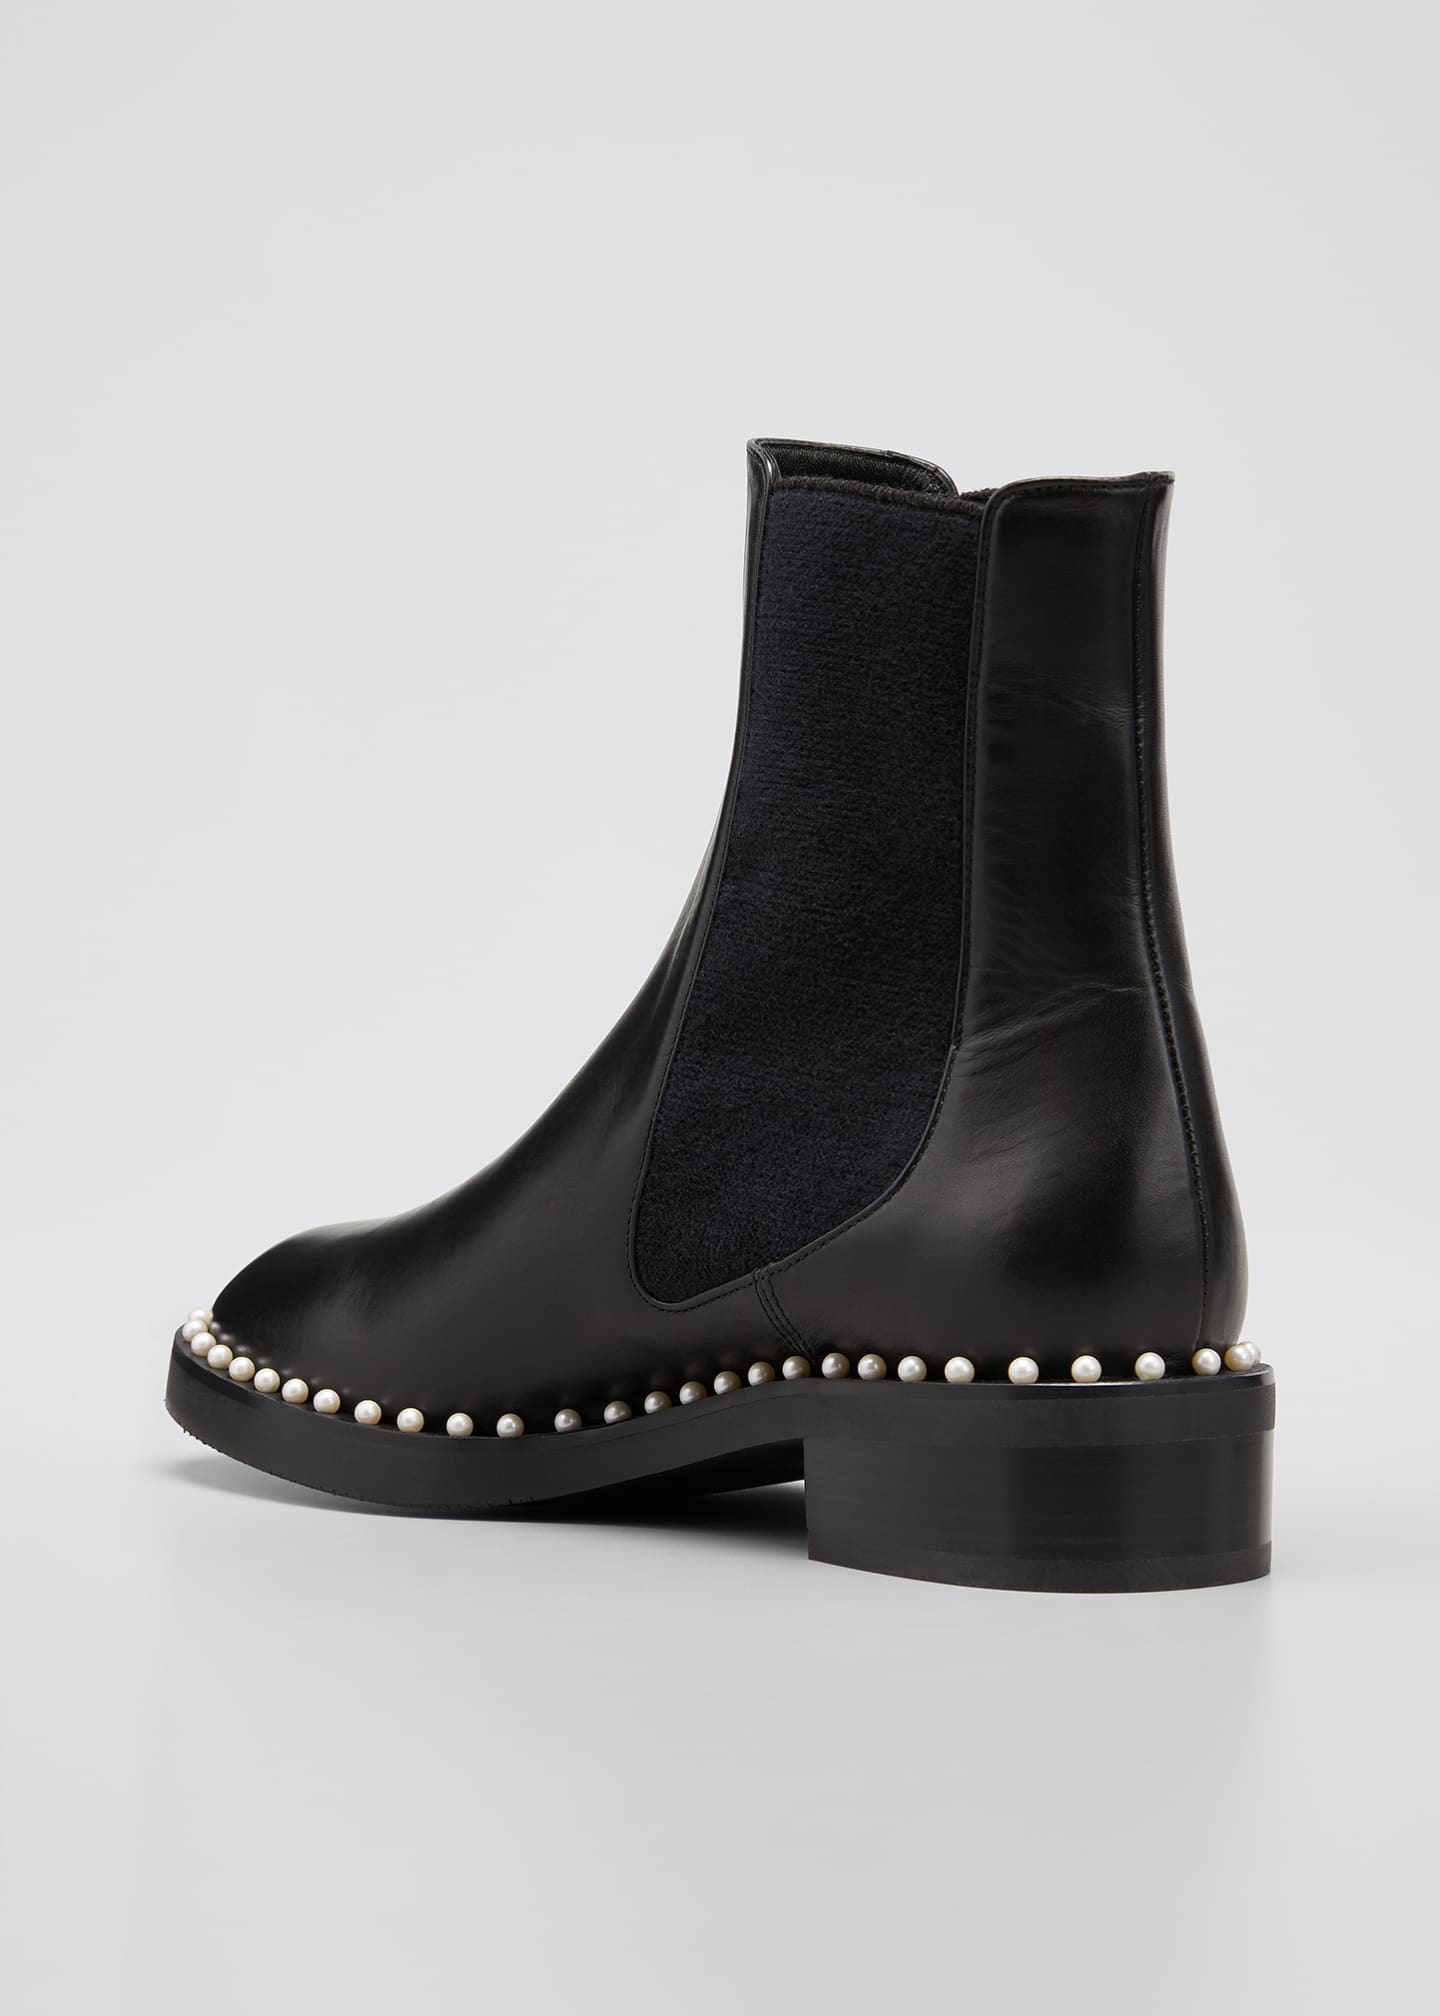 Stuart Weitzman Cline Pearly Studded Leather Chelsea Booties - Bergdorf ...